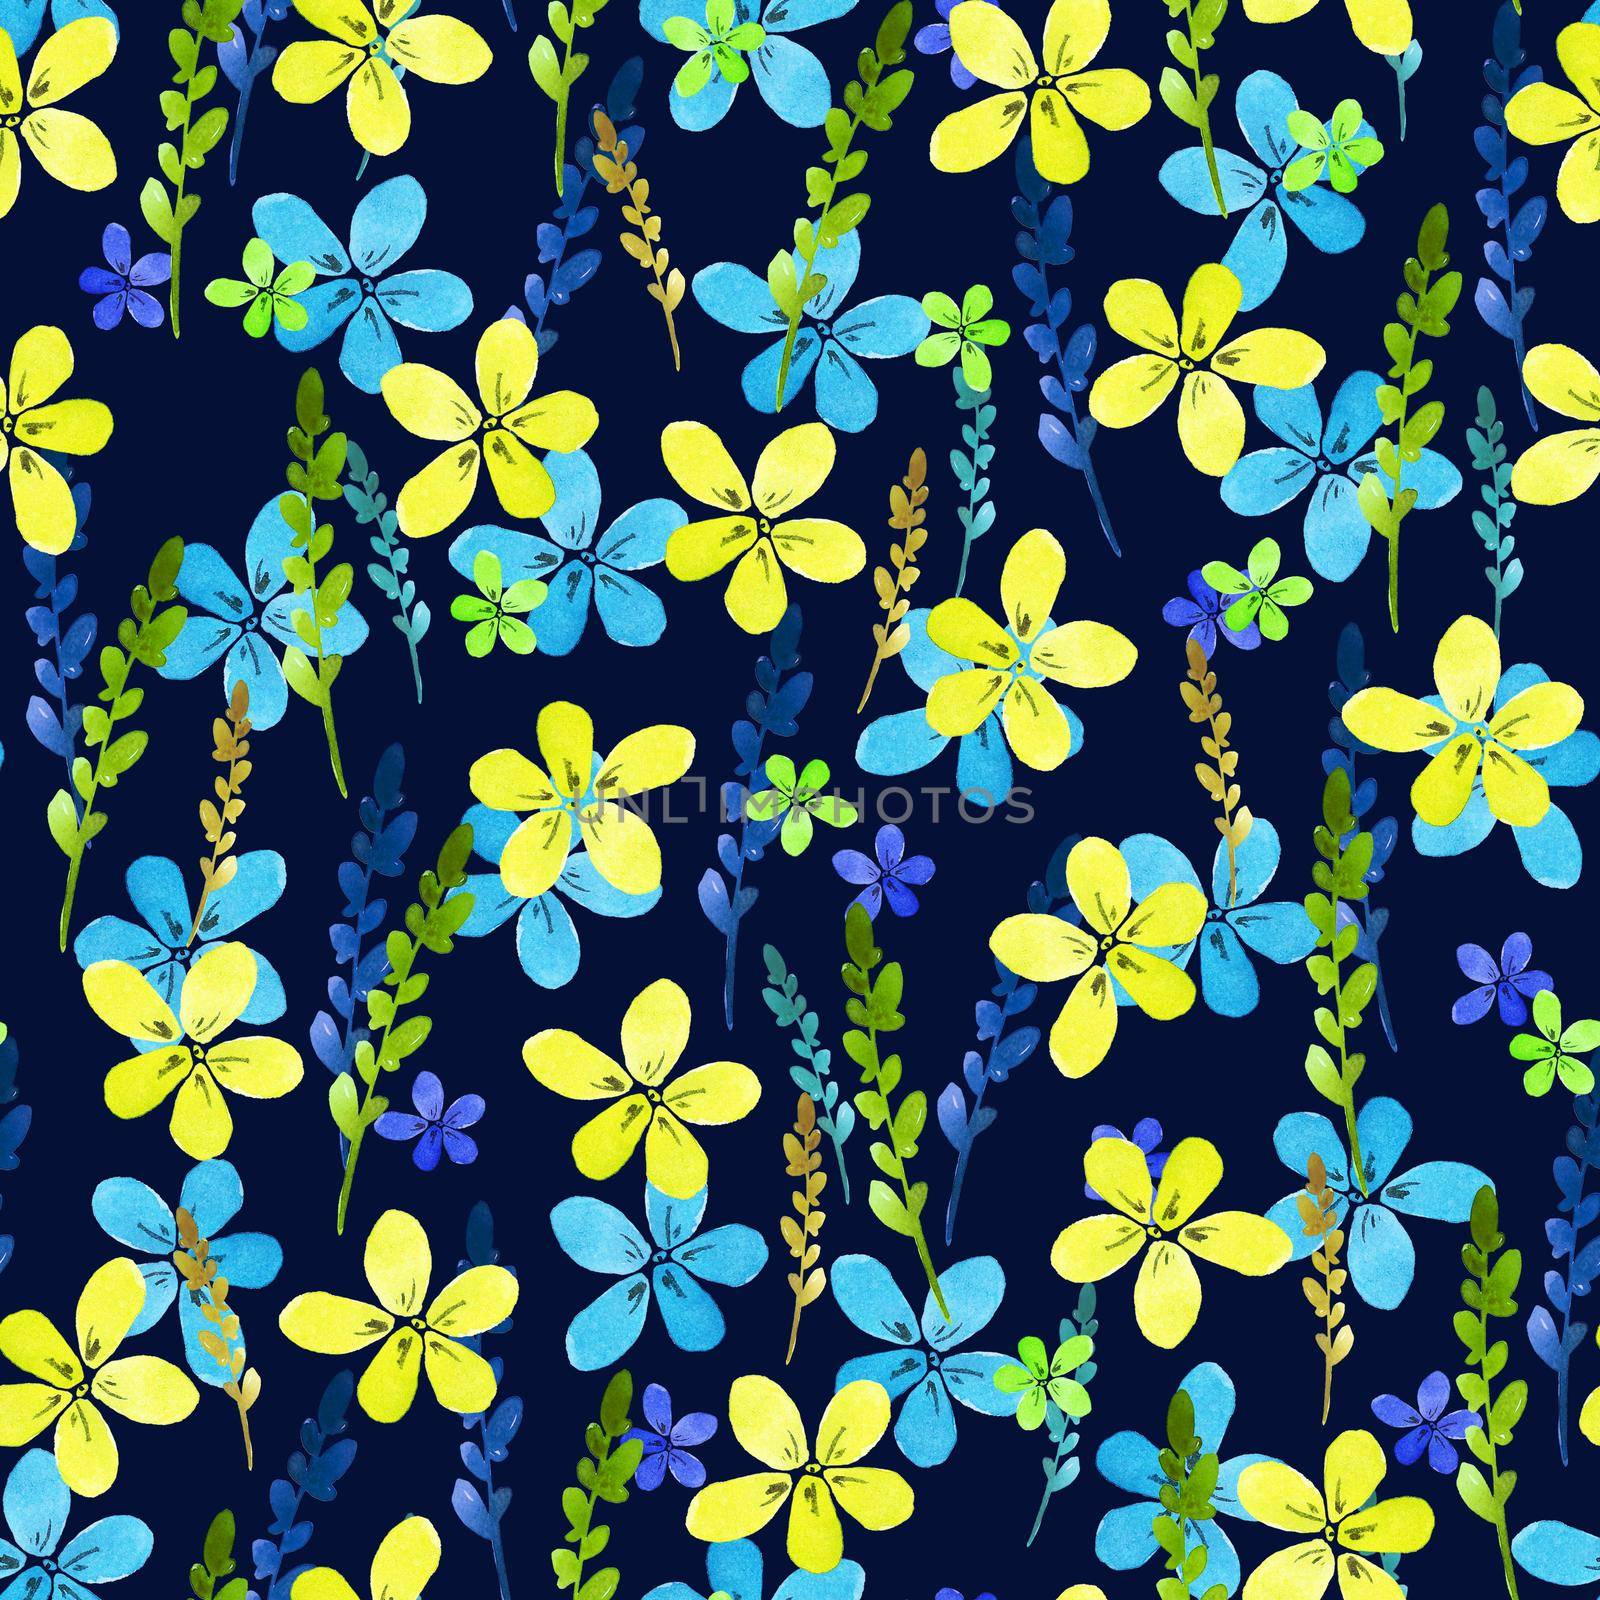 Seamless floral pattern with watercolor blue yellow flowers and leaves in vintage style on background. . Hand made. Ornate for textile, fabric. Nature illustration. Painting elements. by DesignAB